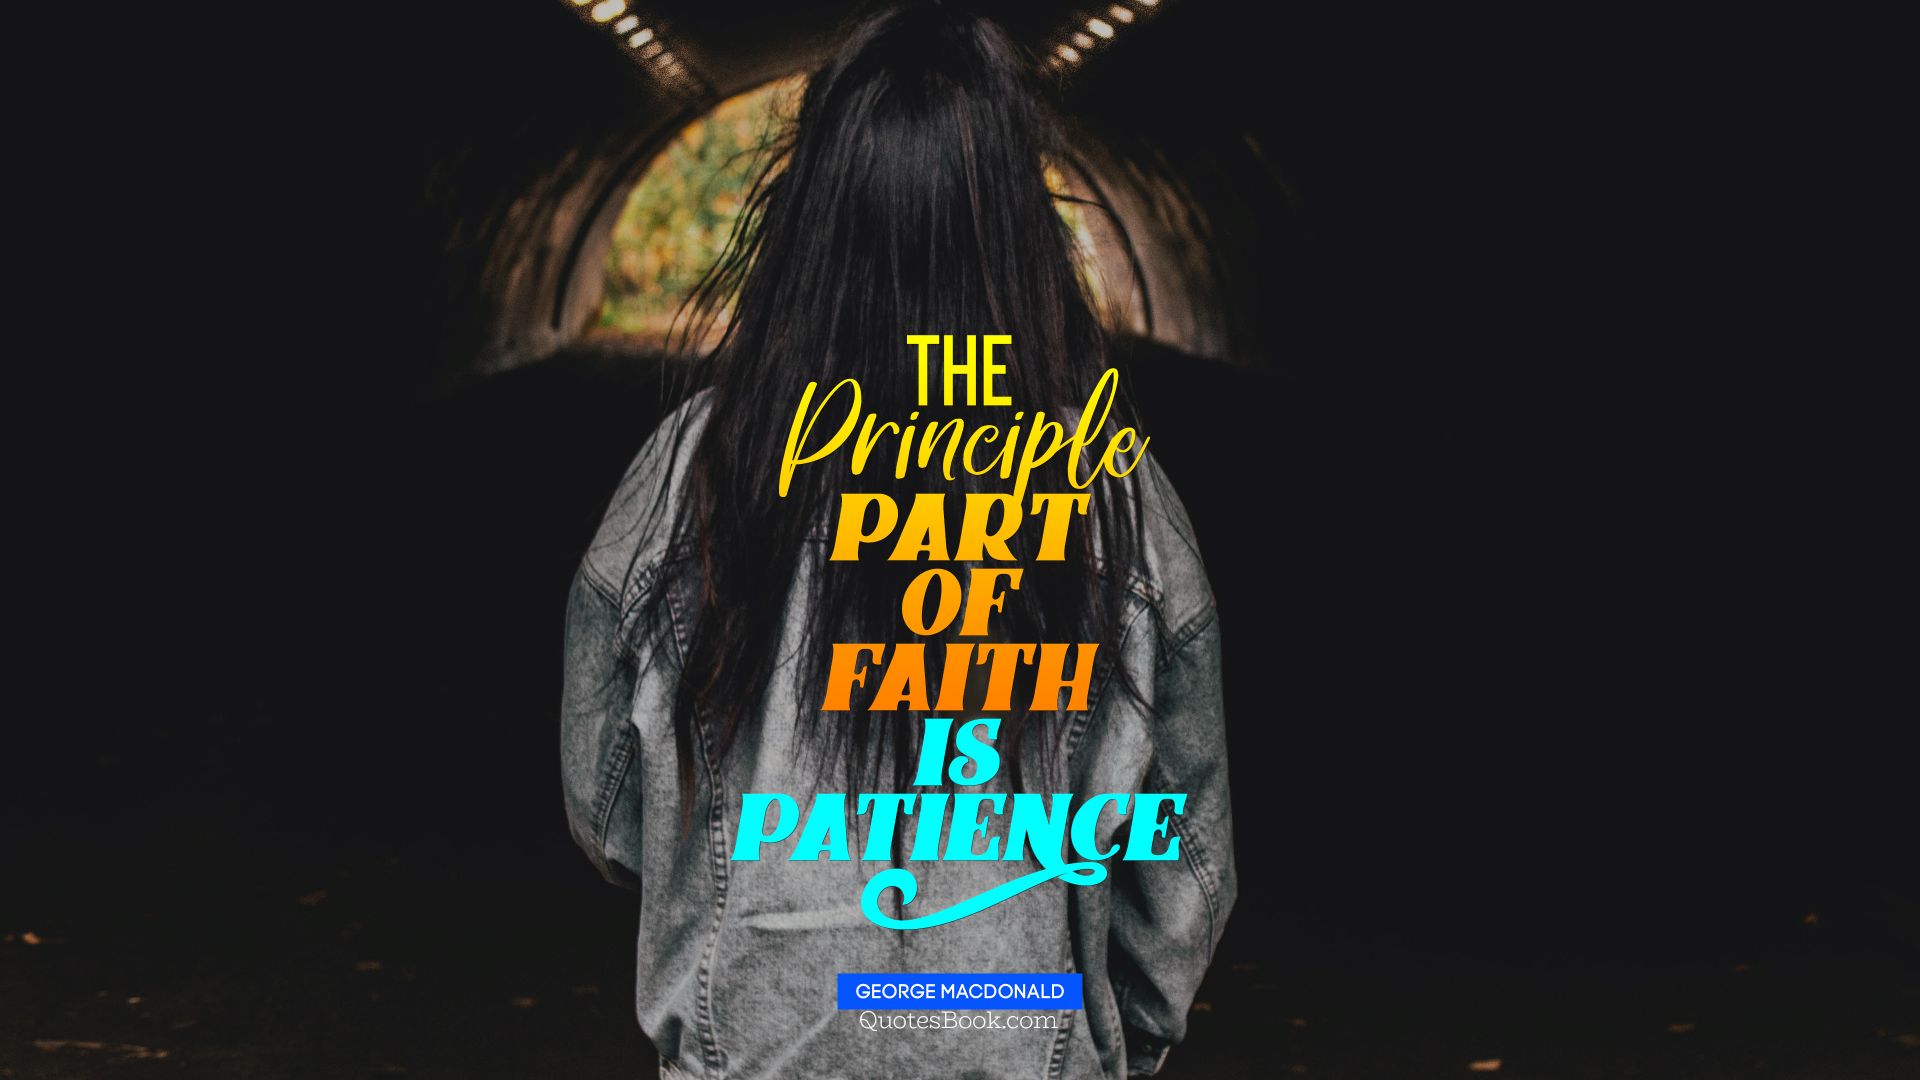 The principle part of faith is patience. - Quote by George MacDonald